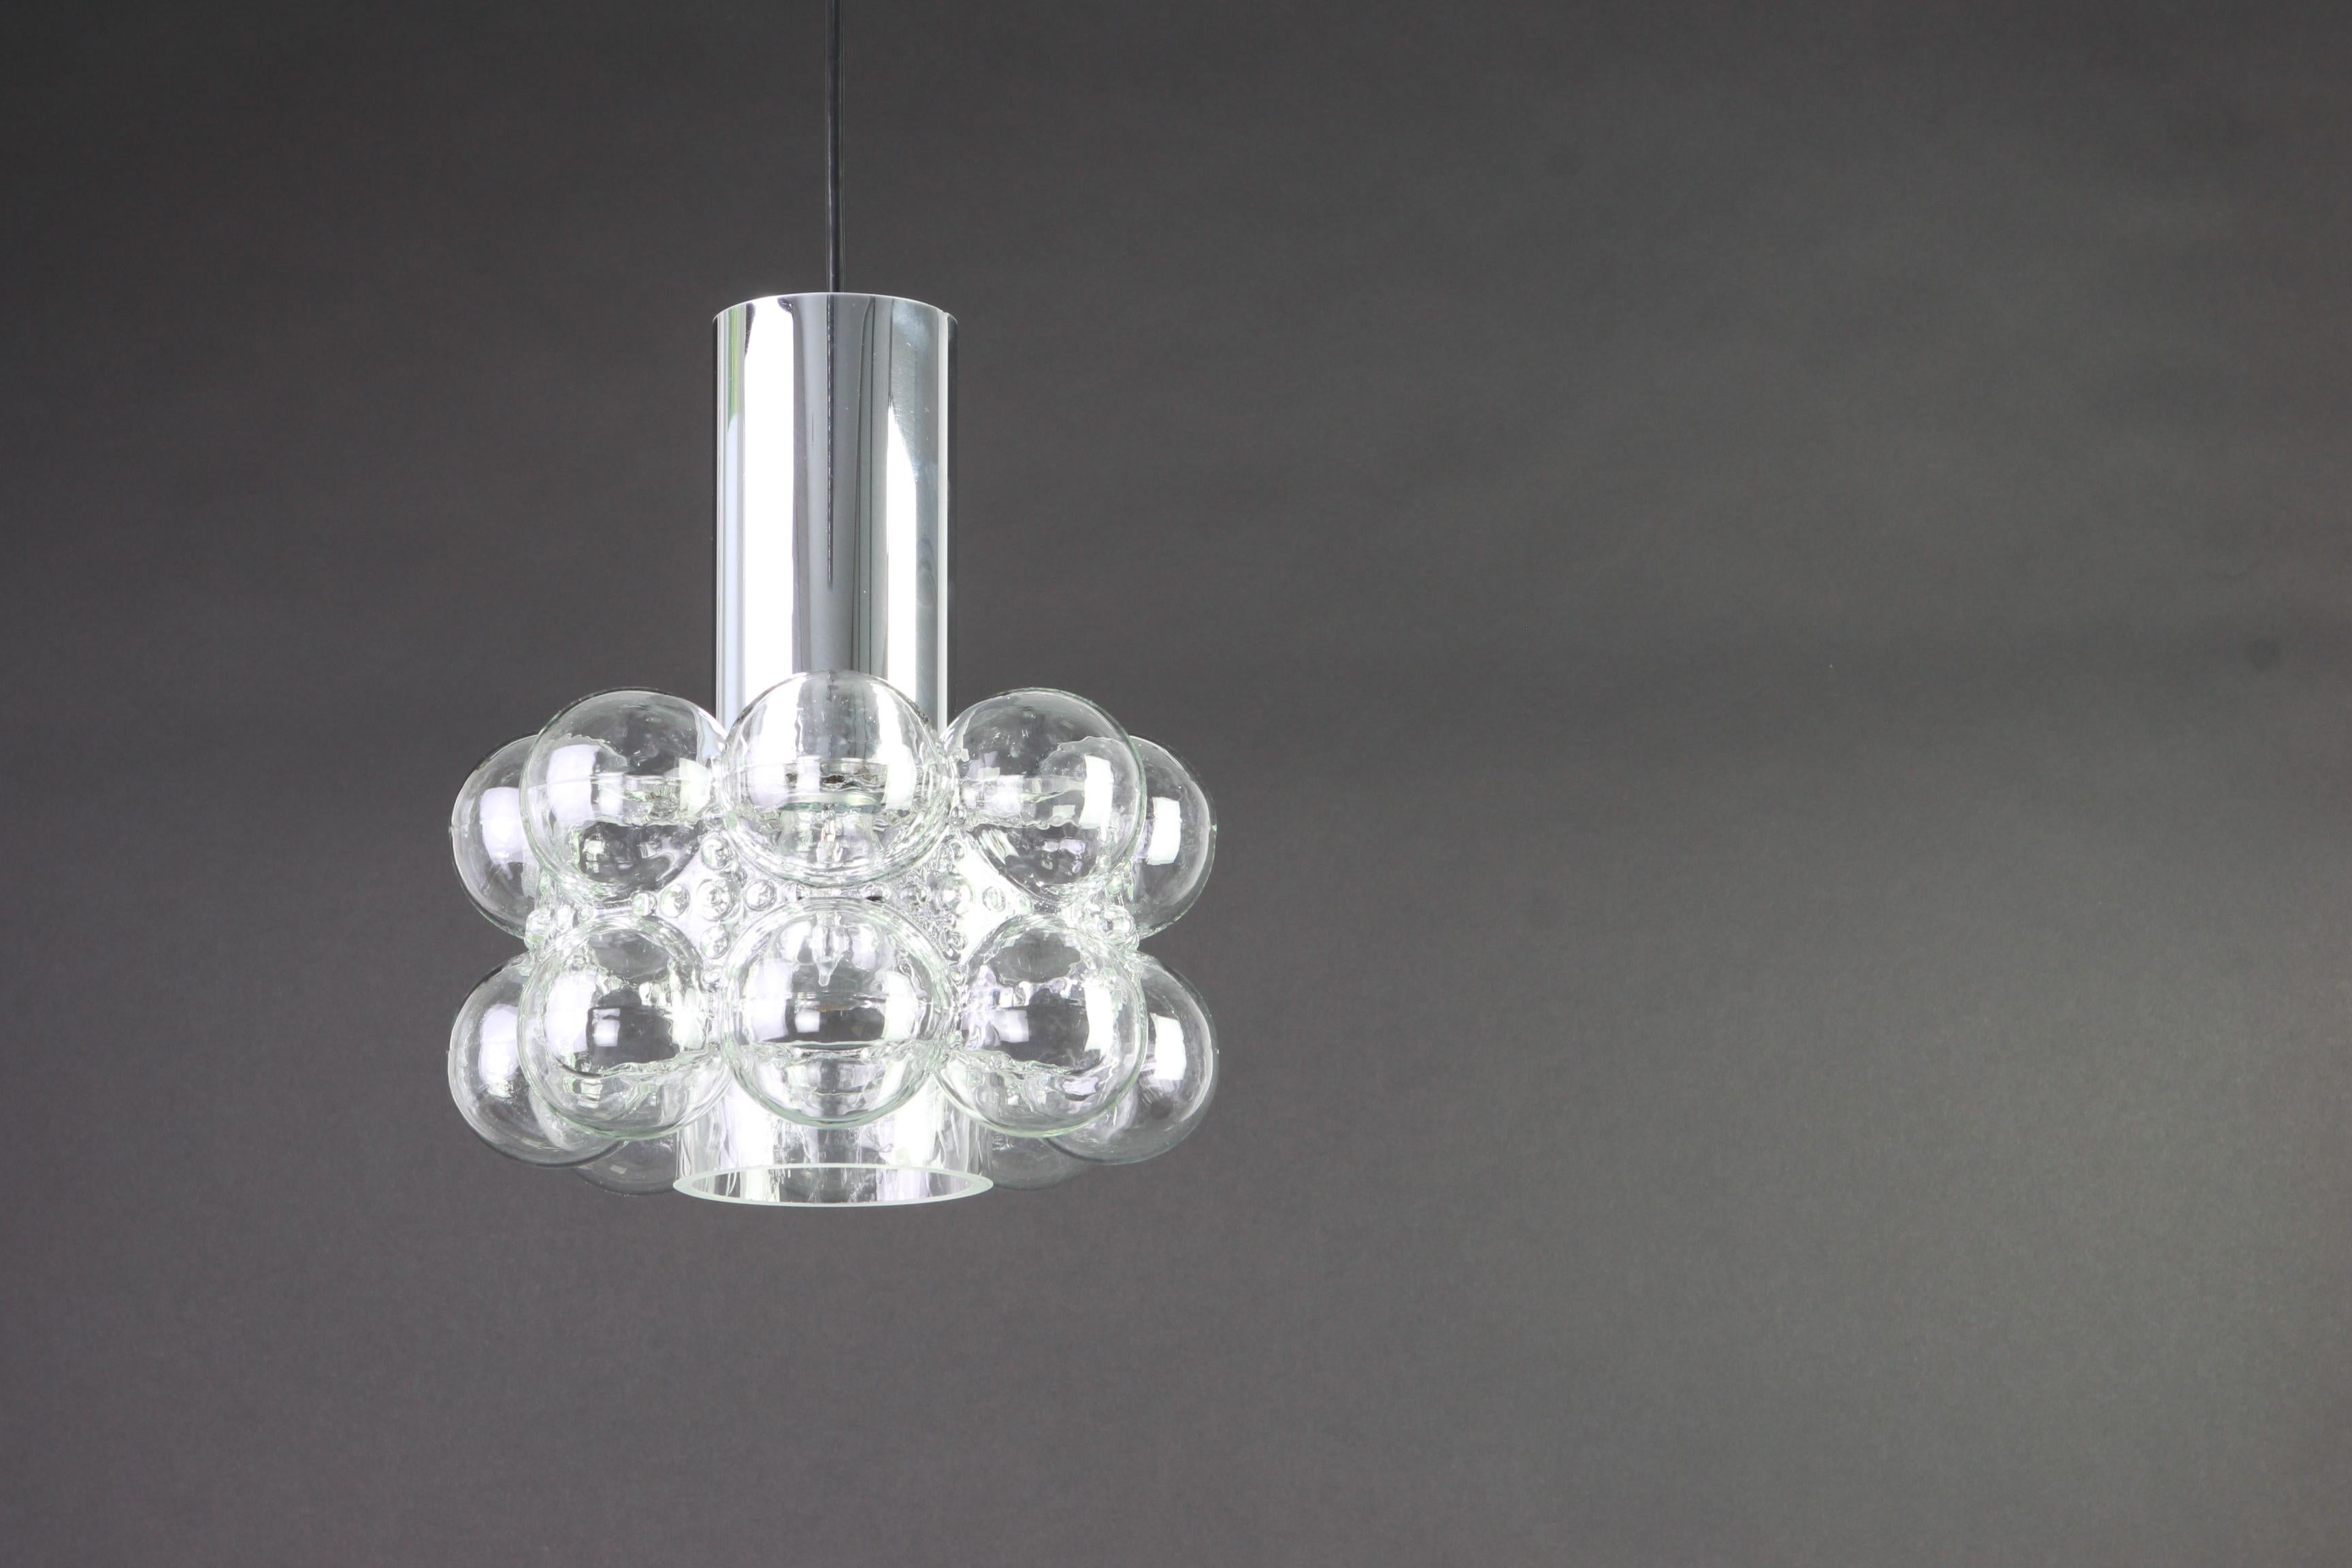 1 of 2 round bubble glass pendant designed by Helena Tynell for Limburg, manufactured in Germany, circa 1970s.

Sockets: needs 1 x E27 standard bulb with 100W max each.
Light bulbs are not included. It is possible to install this fixture in all